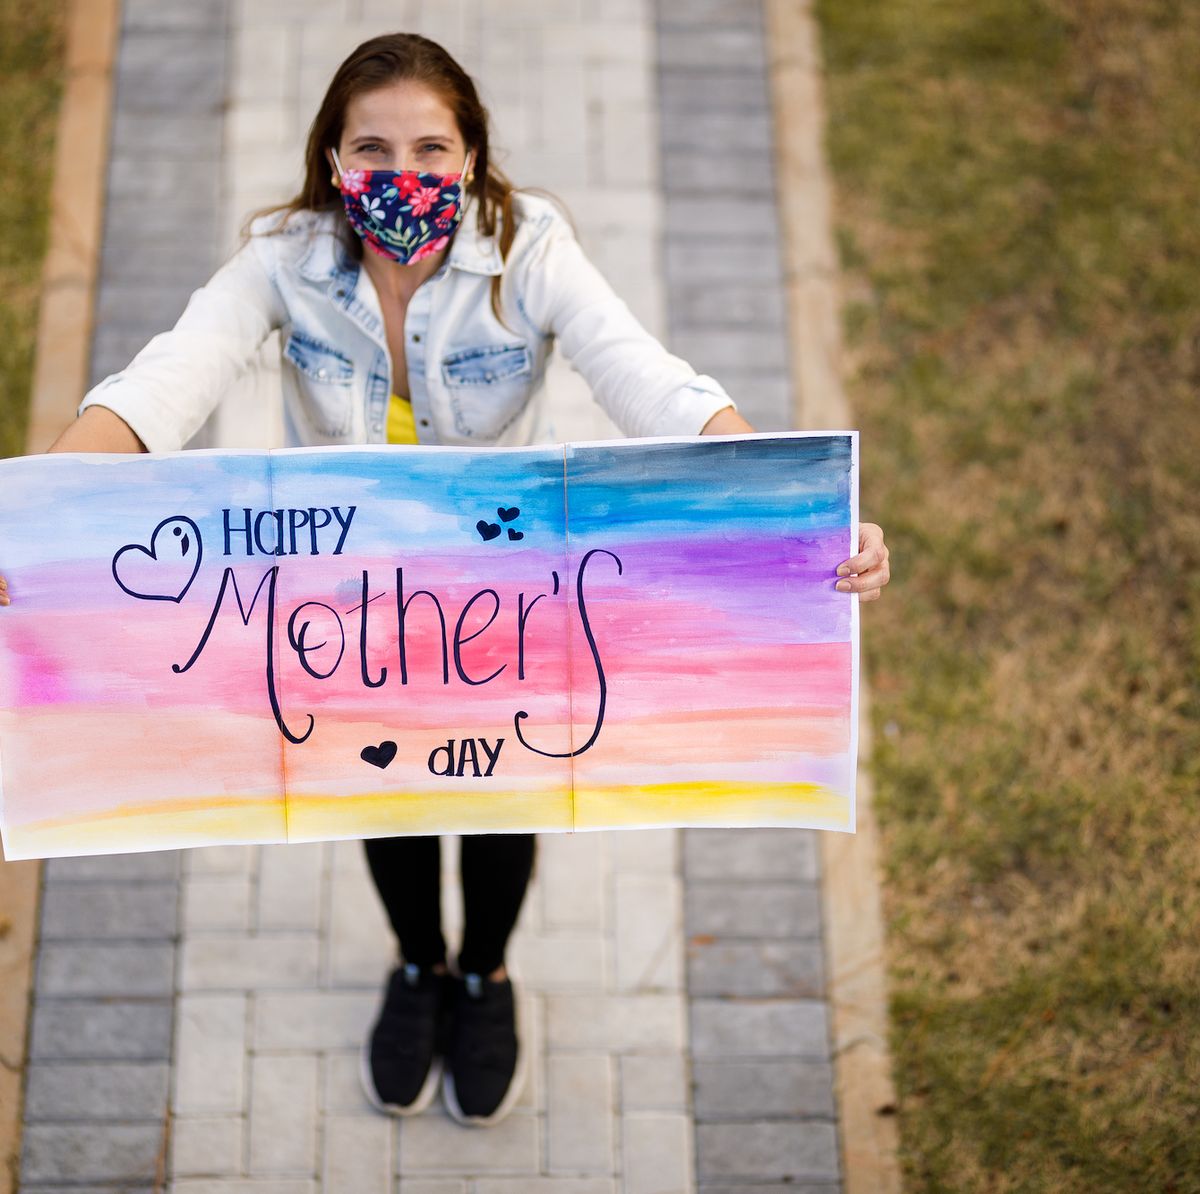 Easy DIY Mother's Day 2020 gifts you can make while in quarantine